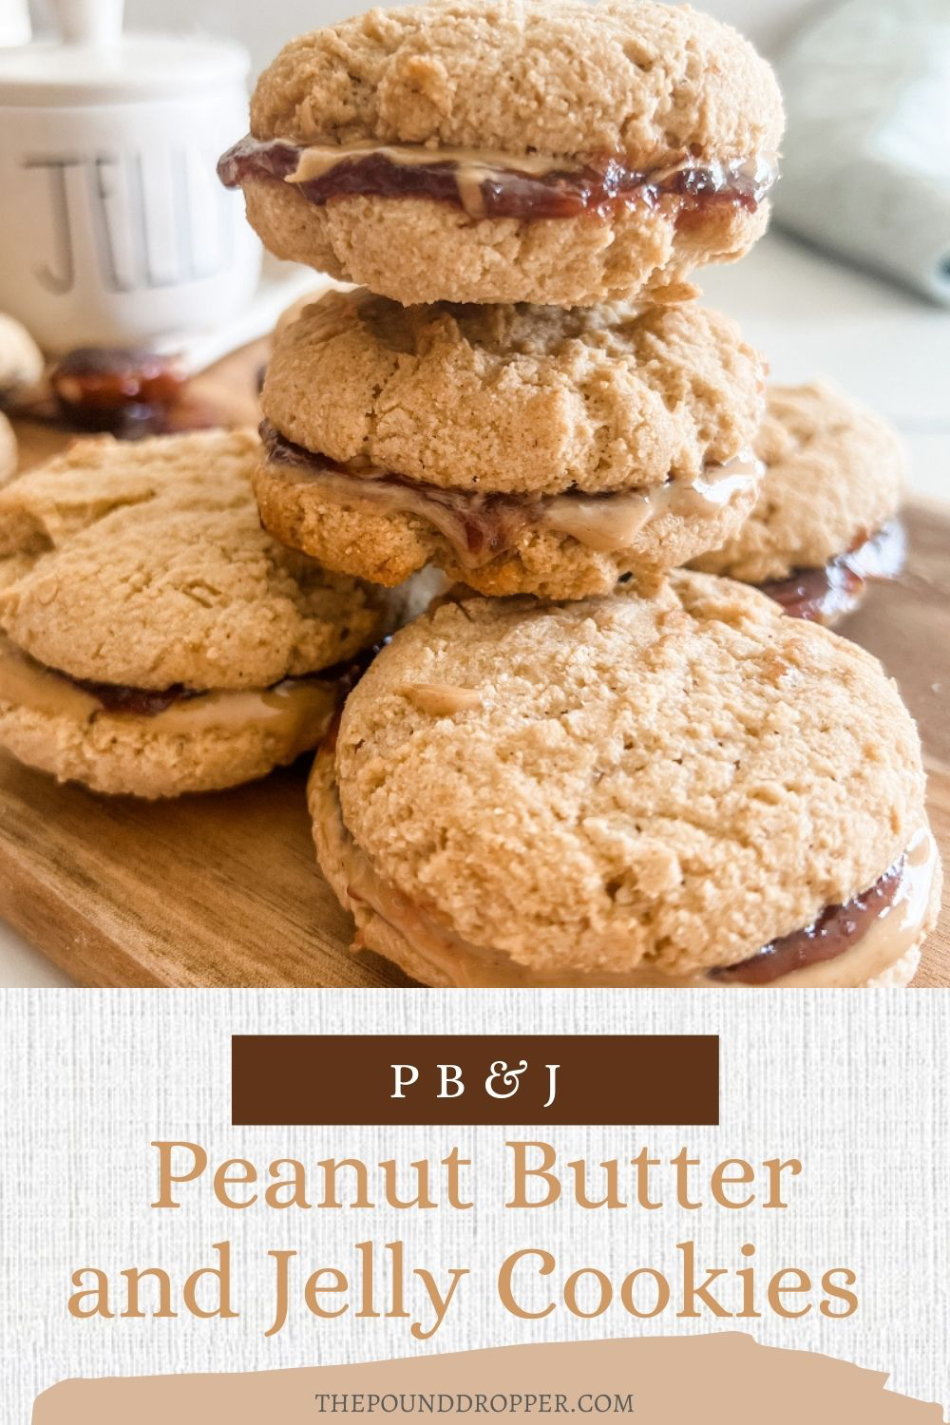 Peanut Butter and Jelly Cookies via @pounddropper